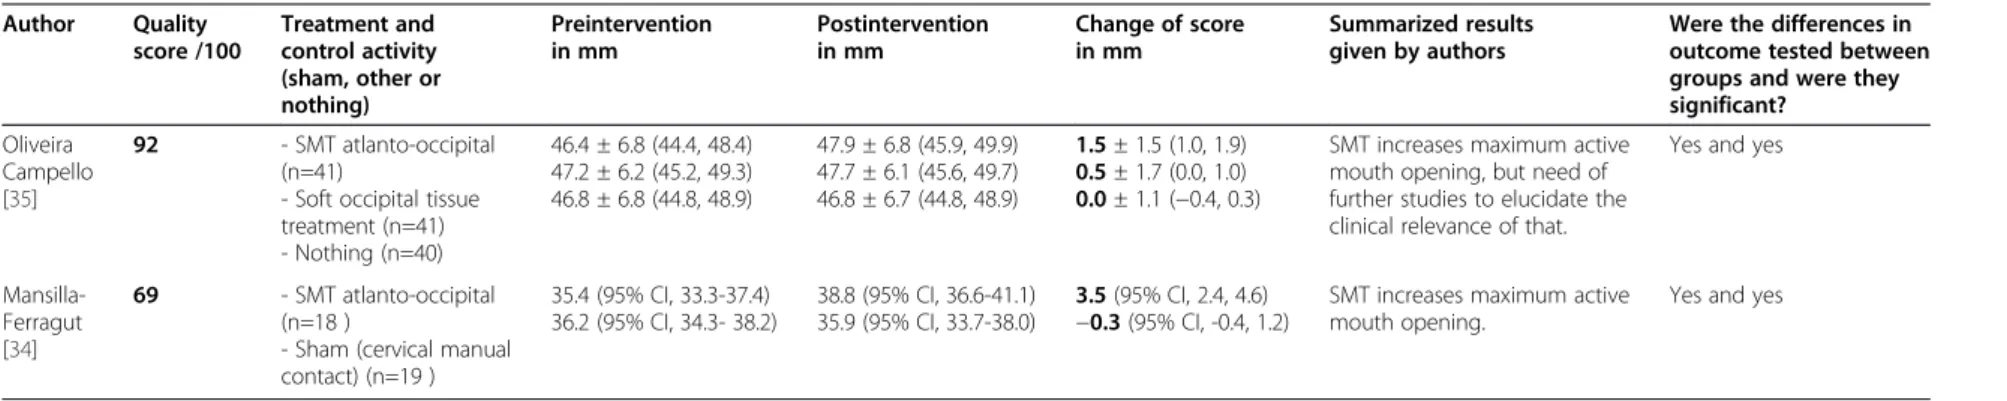 Table 3 Effects of SMT on mouth opening Author Quality score /100 Treatment and control activity (sham, other or nothing) Preinterventionin mm Postinterventionin mm Change of scorein mm Summarized resultsgiven by authors